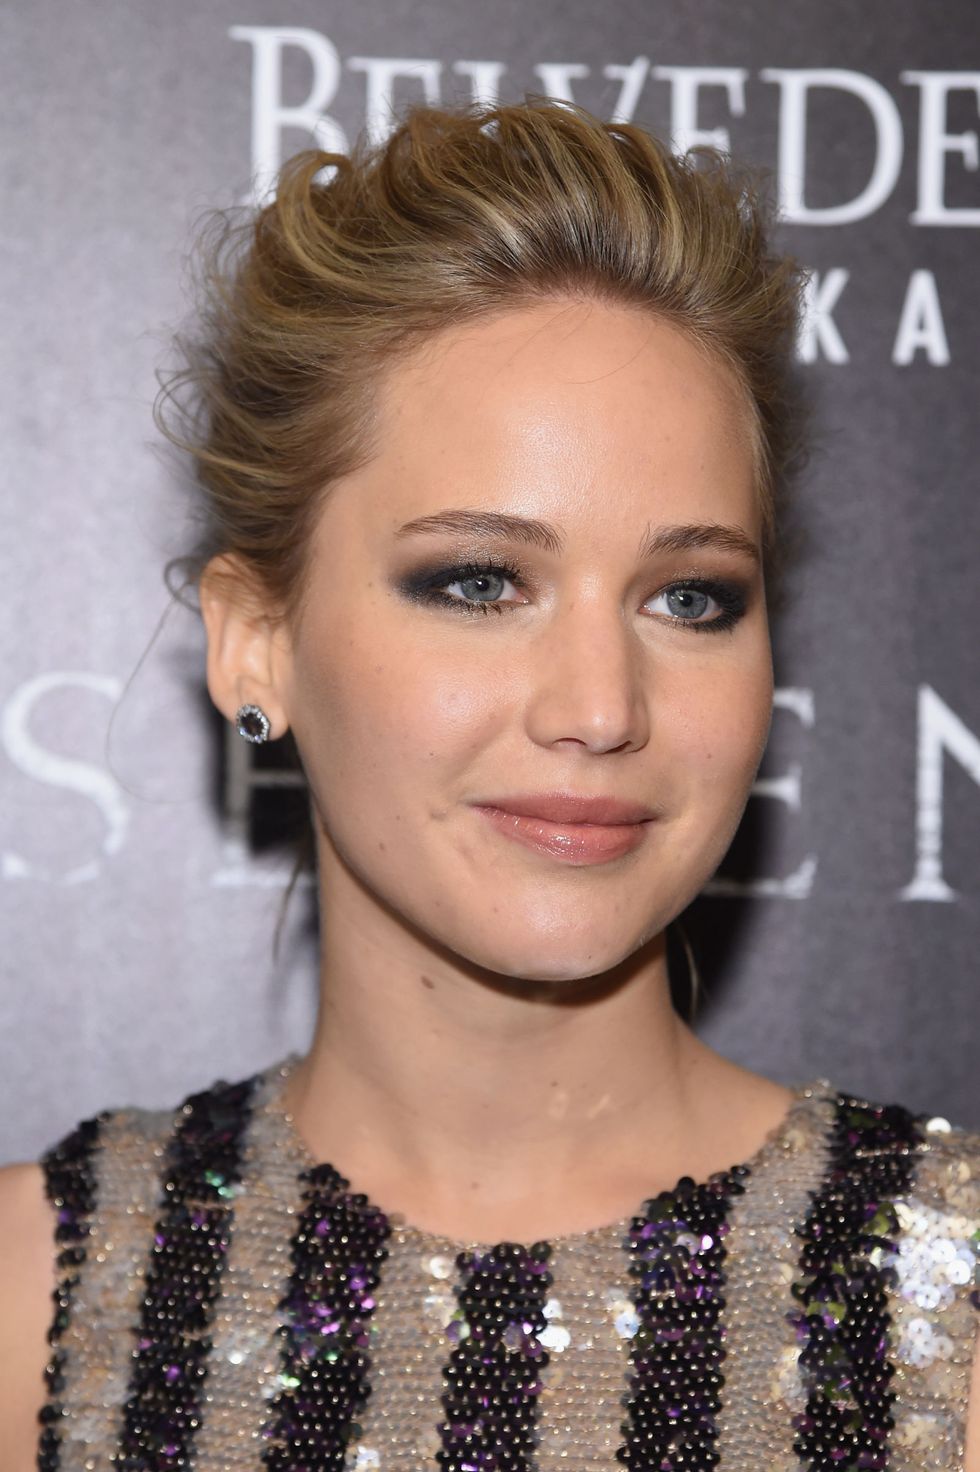 NEW YORK, NY - MARCH 21:  Actress Jennifer Lawrence attends a screening of "Serena" hosted by Magnolia Pictures and The Cinema Society with Dior Beauty on March 21, 2015 in New York City.  (Photo by Jamie McCarthy/Getty Images)